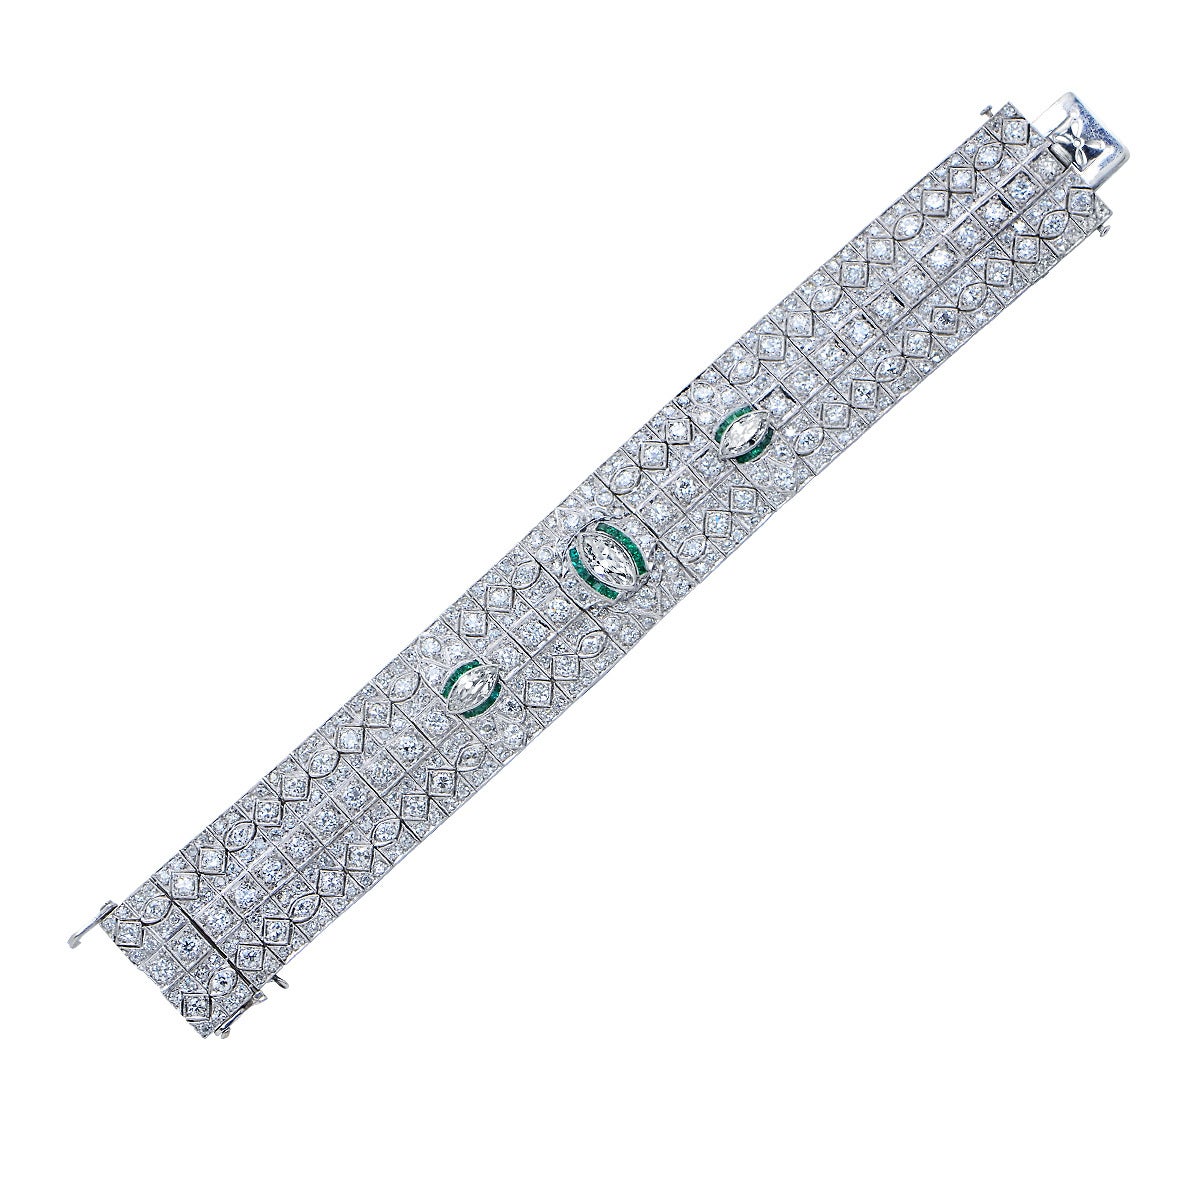 Platinum Diamond Bracelet Featuring 357 Mix Cut Diamonds with an Estimated Total Weight of 25cts.